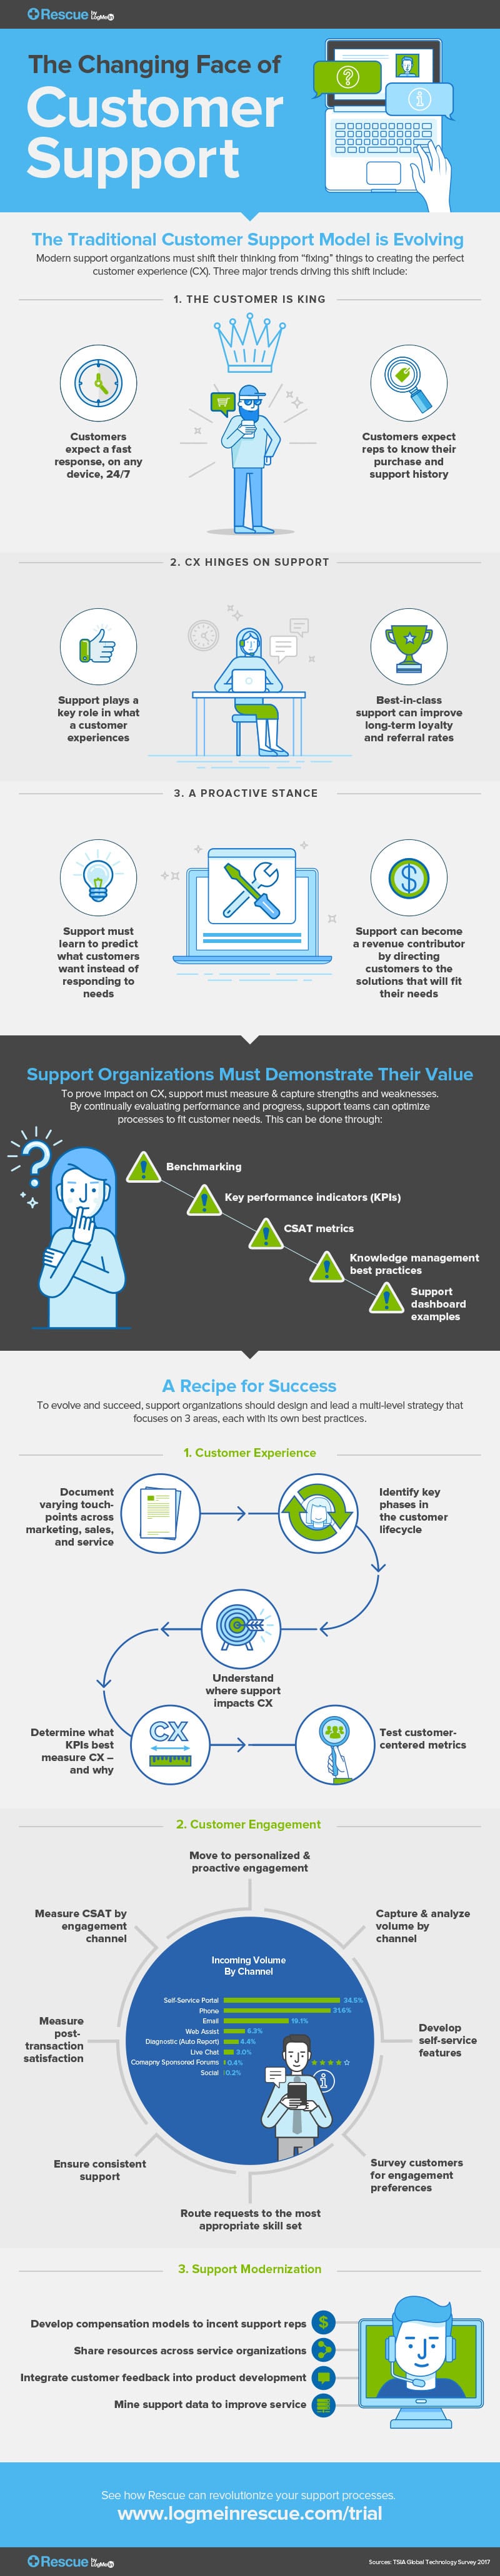 The changing face of customer support infographic.